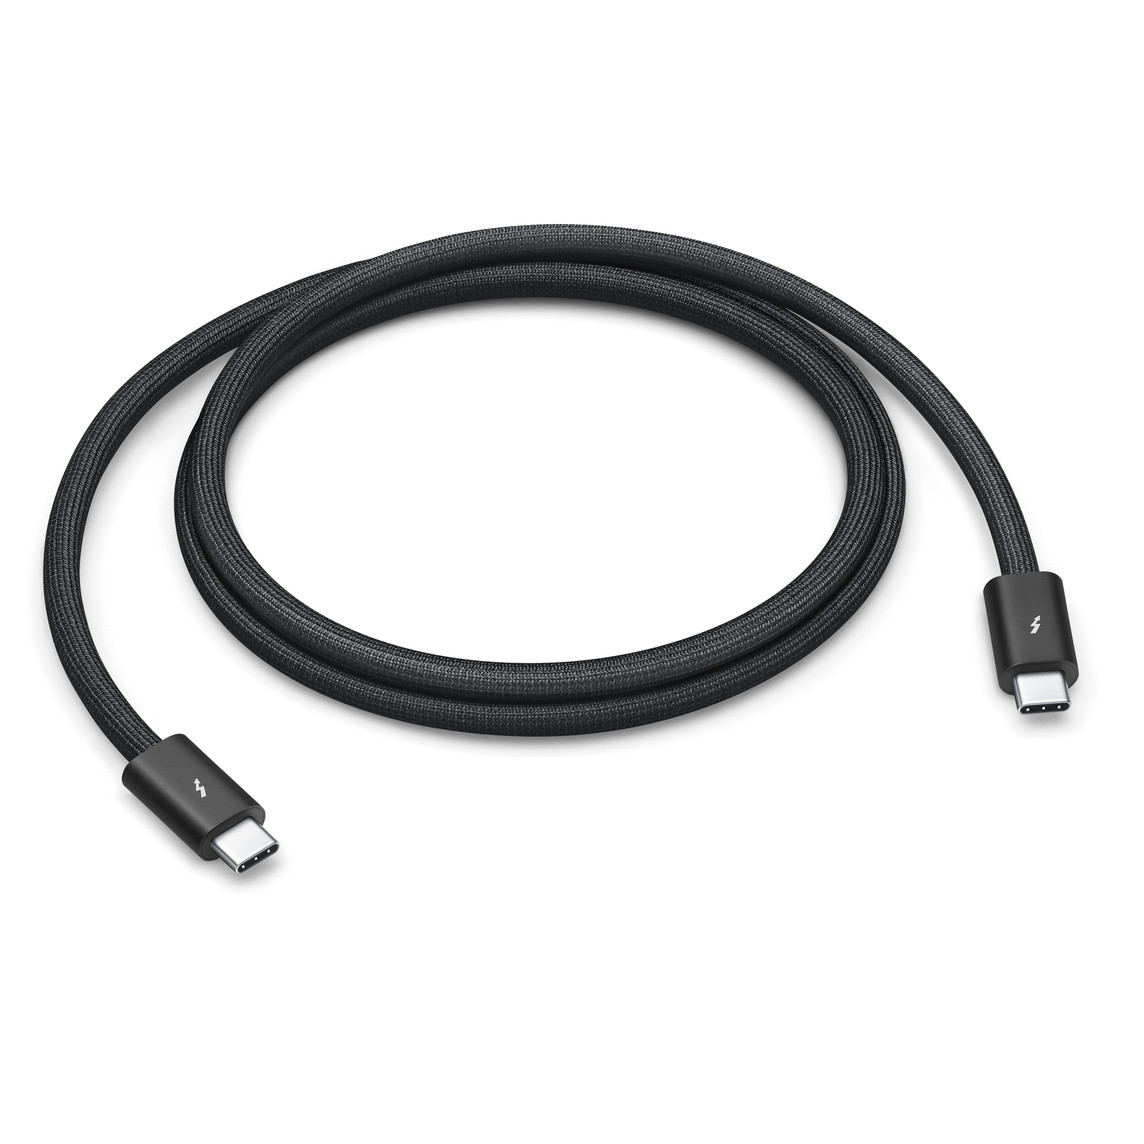 Thunderbolt 4 Pro Cable (1 meter) features a black braided design that coils without tangling, and can transfer data at up to 40 gigabytes per second.